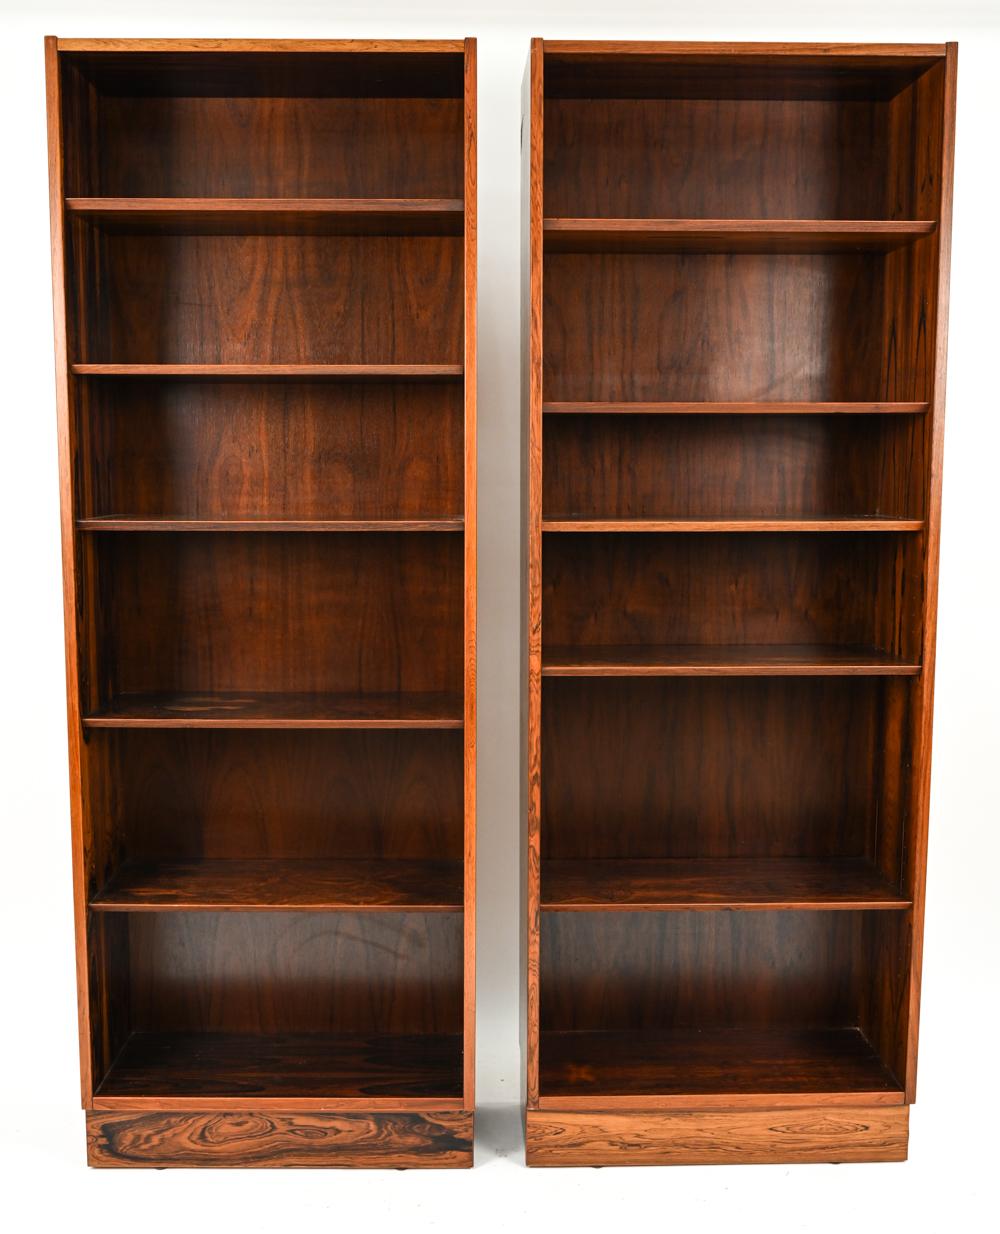 A beautiful pair of Danish mid-century bookcases designed by Carlo Jensen for Poul Hundevad, c. 1960's. This gorgeous minimalist design lets the beautiful rosewood veneer shine. With original Hundevad label to the back.